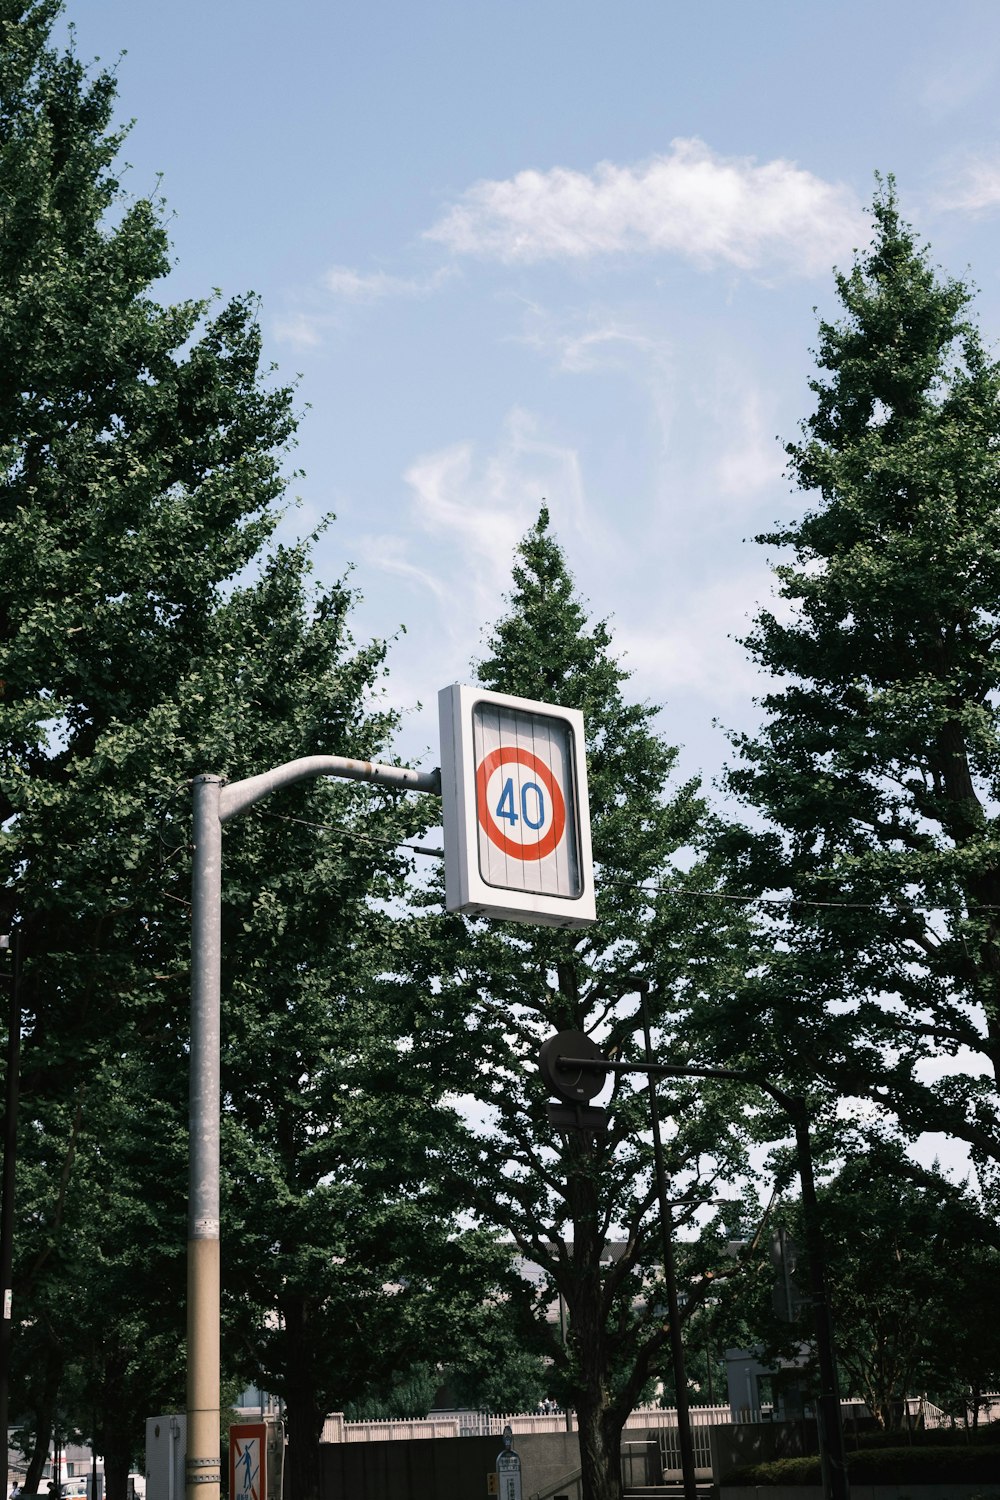 a street sign on a pole with trees in the background